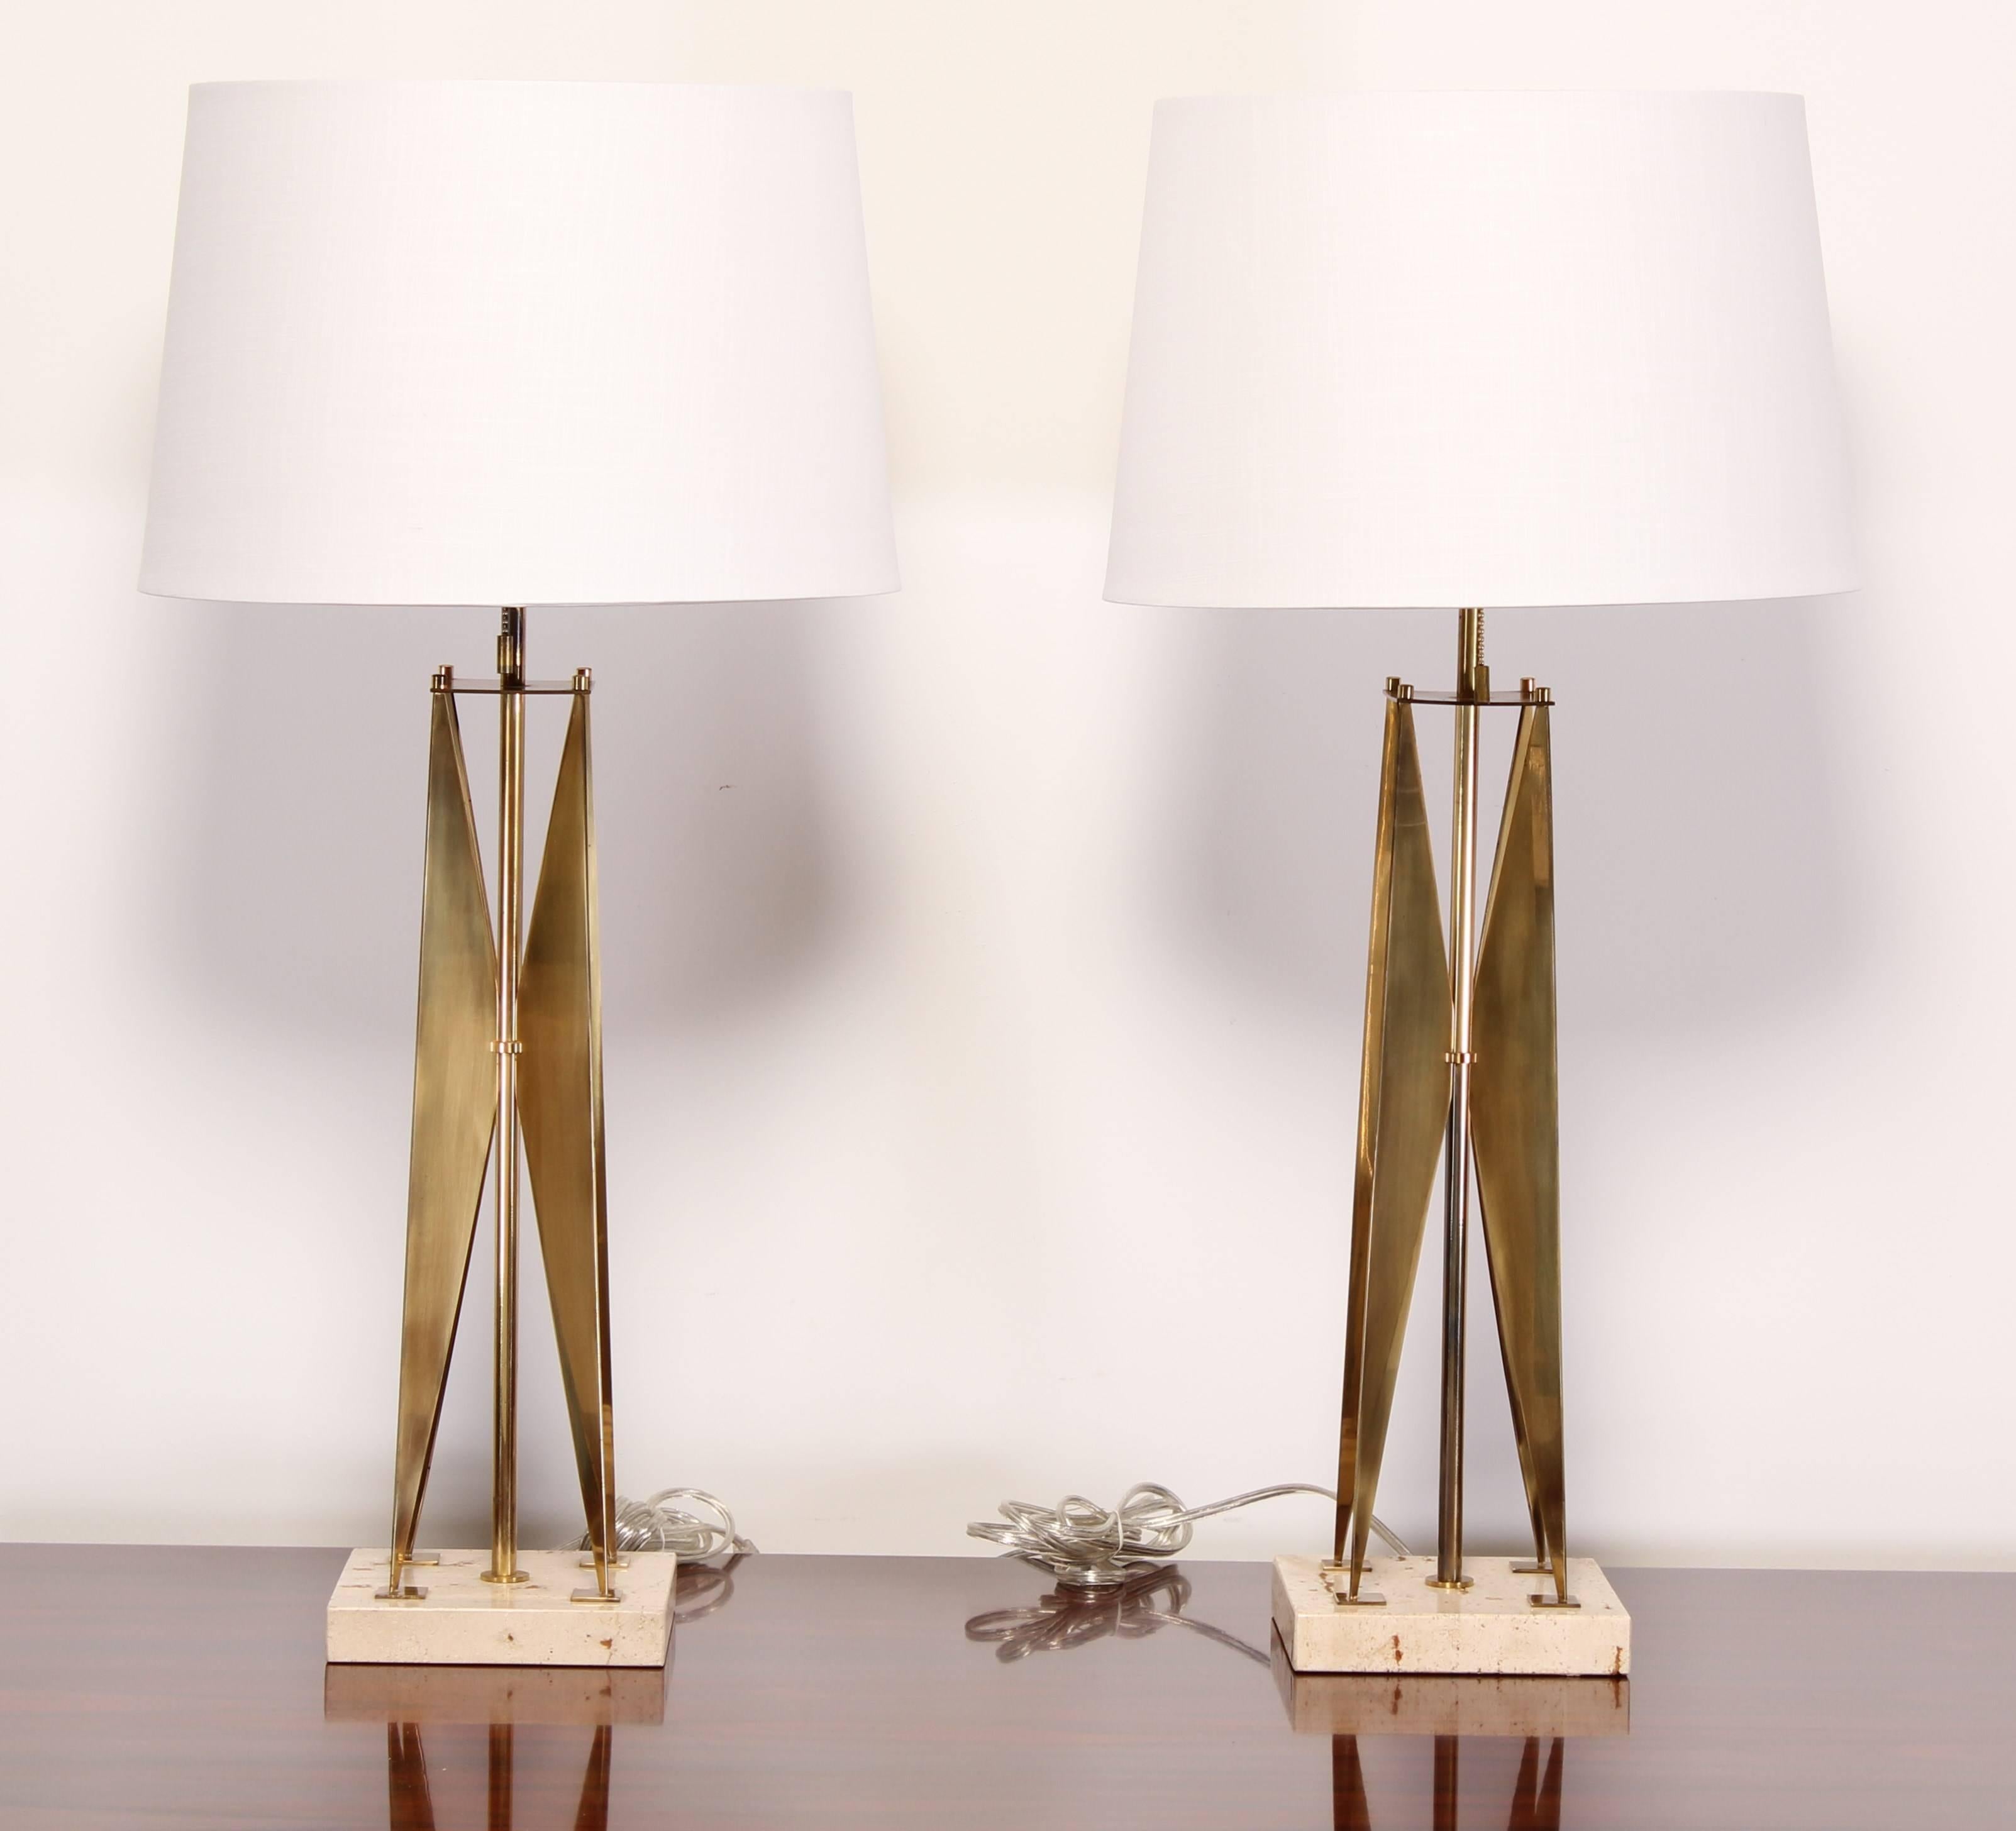 An elegant pair of Gerald Thurston style brass and travertine marble lamps, 1970. Shades available if desired, 15